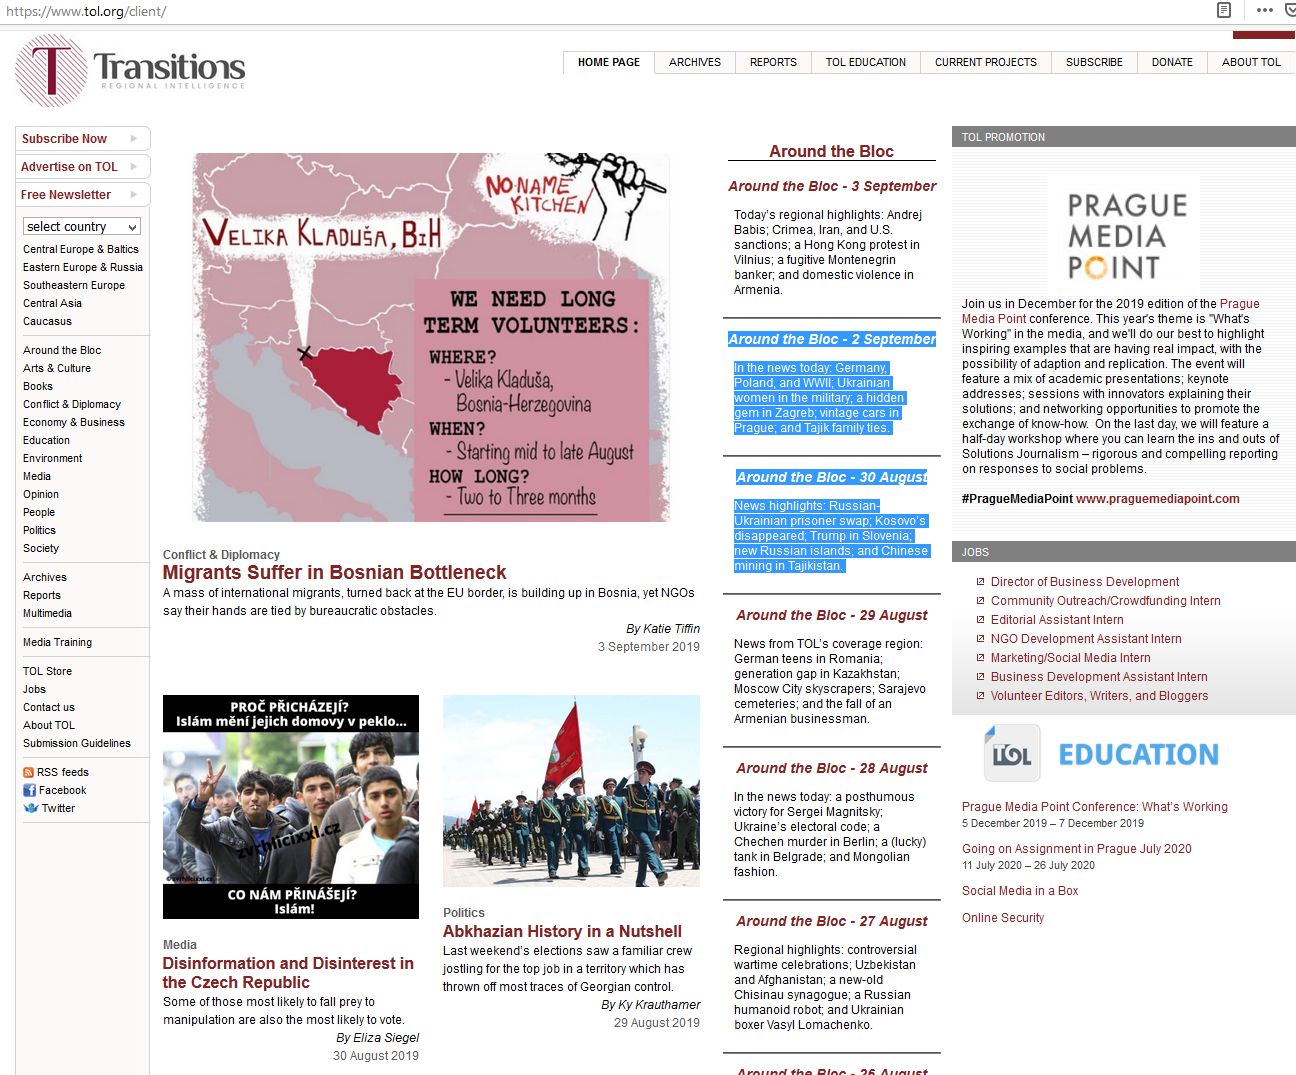 Transitions Online_Politics: Abkhazian History in a Nutshell – 29 August Cover Image